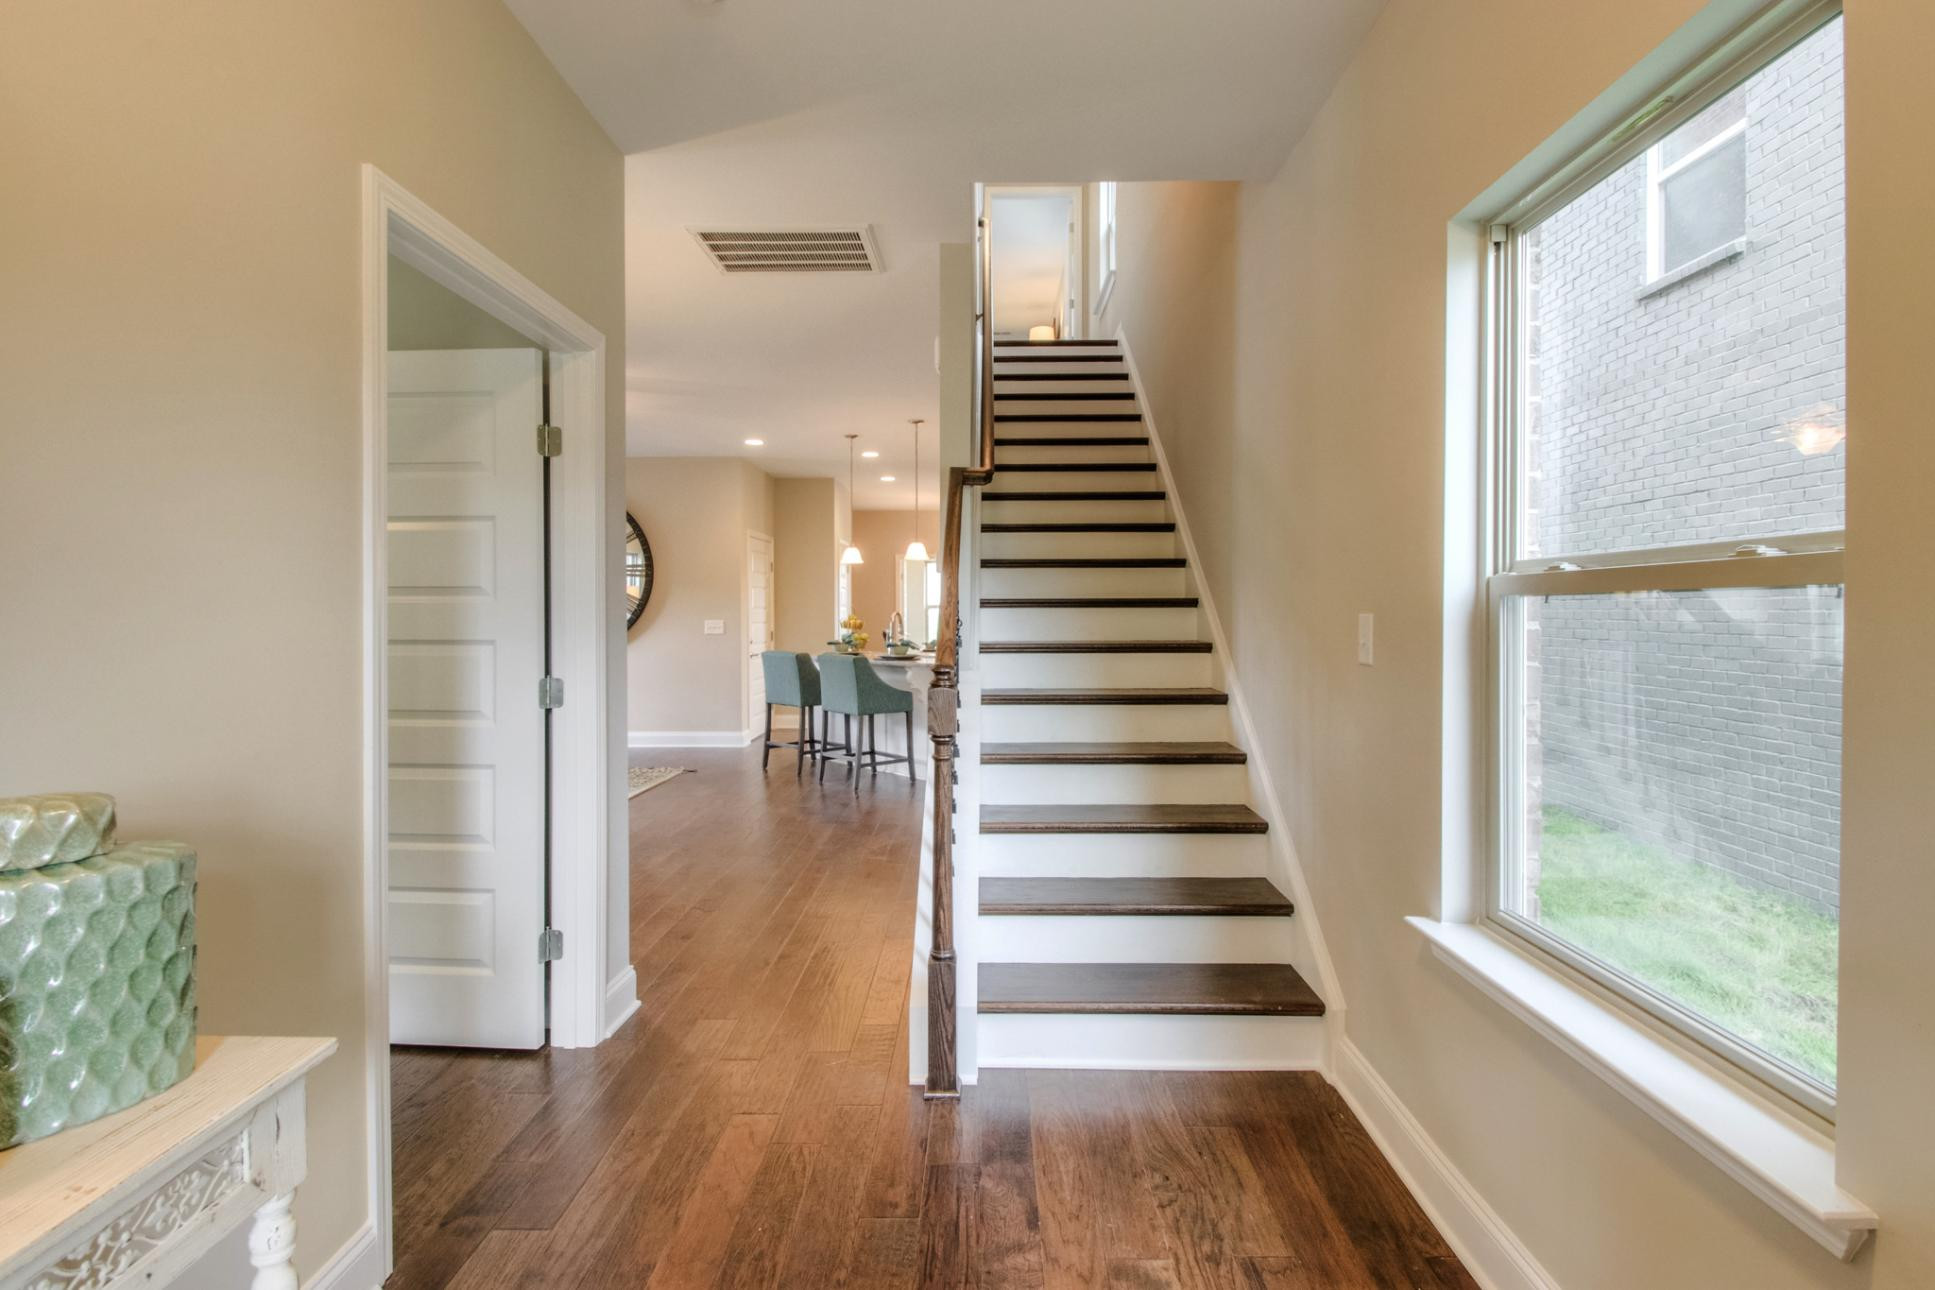 13 Awesome Hardwood Floor Repair Franklin Tn 2024 free download hardwood floor repair franklin tn of the monterey floor plans goodall homes for available elevations 1